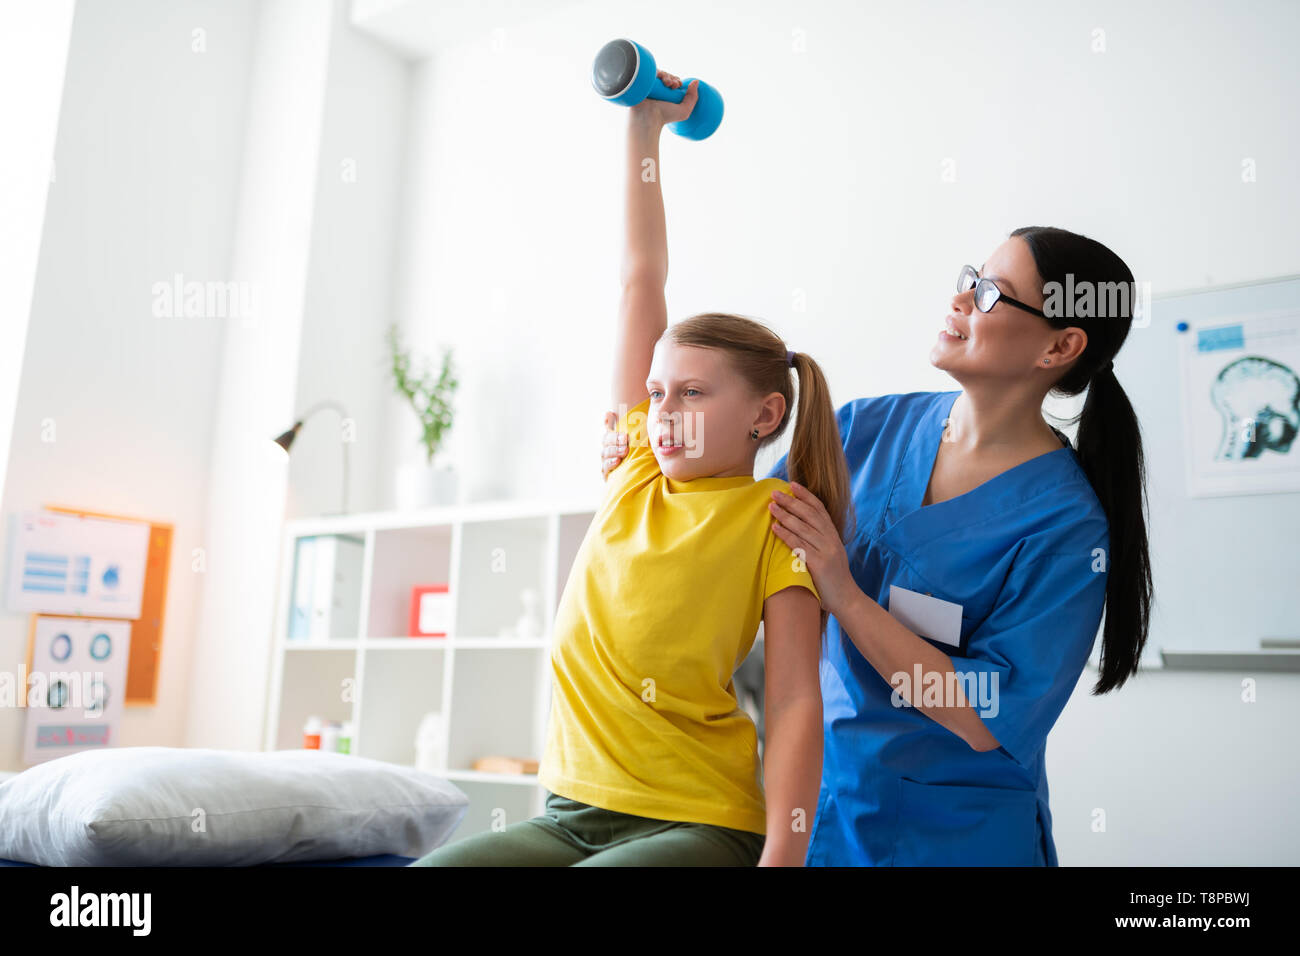 Concentrated skinny girl sitting on the daybed and raising dumbbells Stock Photo